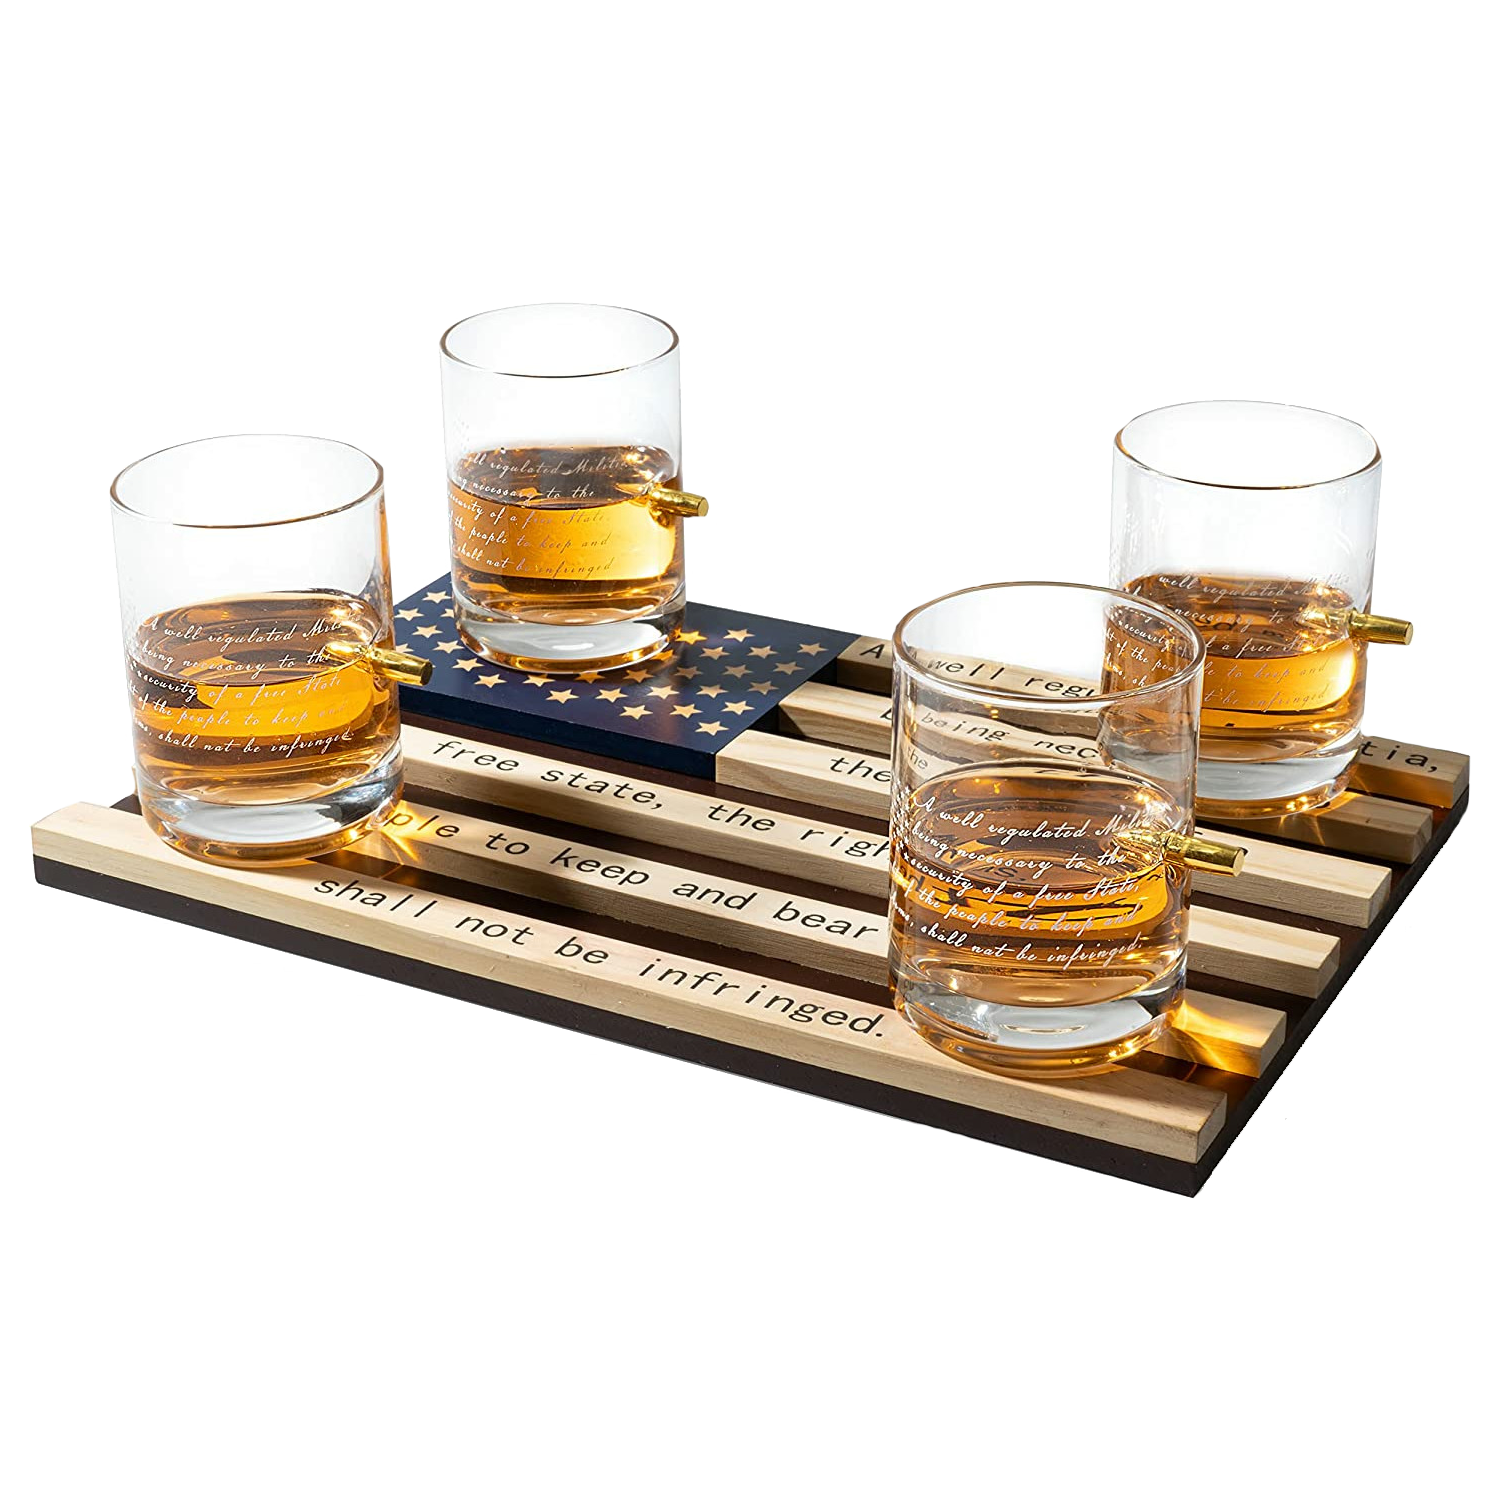 2nd Amendment American Flag Bullet Glasses .308 Real Solid Copper Projectile, Set of 4 Hand Blown Old Fashioned Whiskey Rocks Glasses, Wood Flag Tray with Patriots Gun Rights Law & Military Gift Set-0